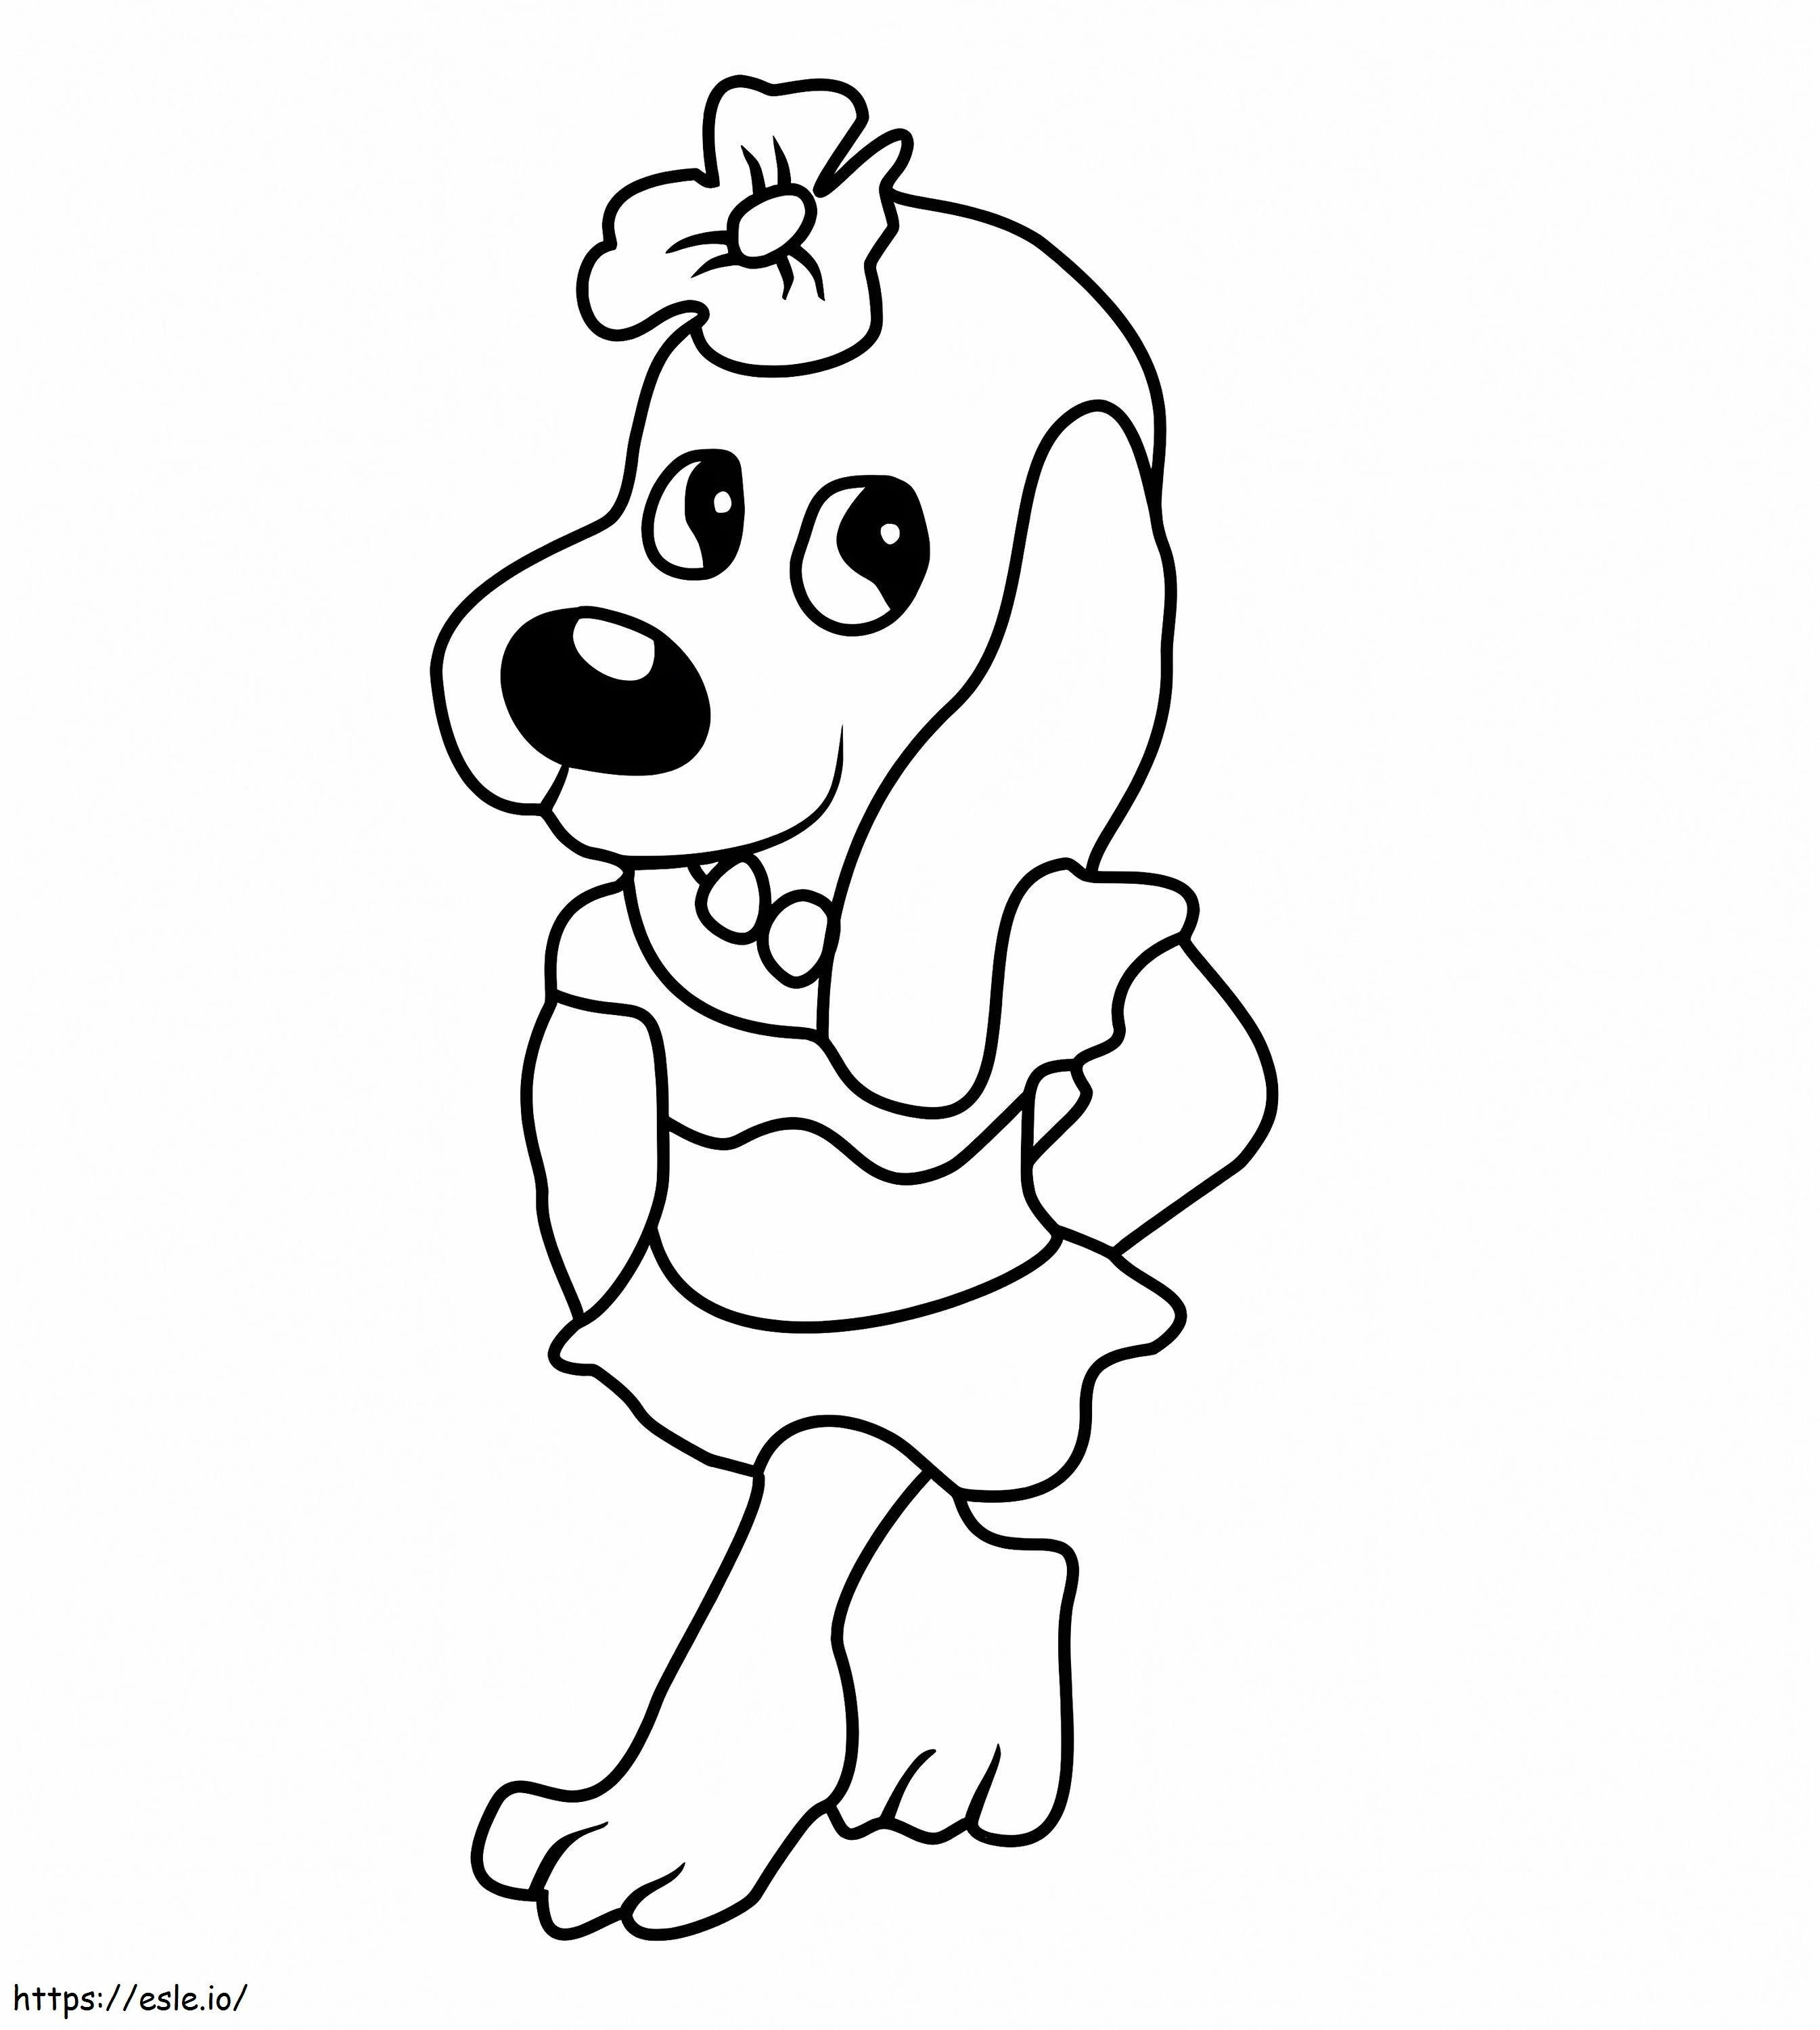 Nose Marie From Pound Puppies coloring page